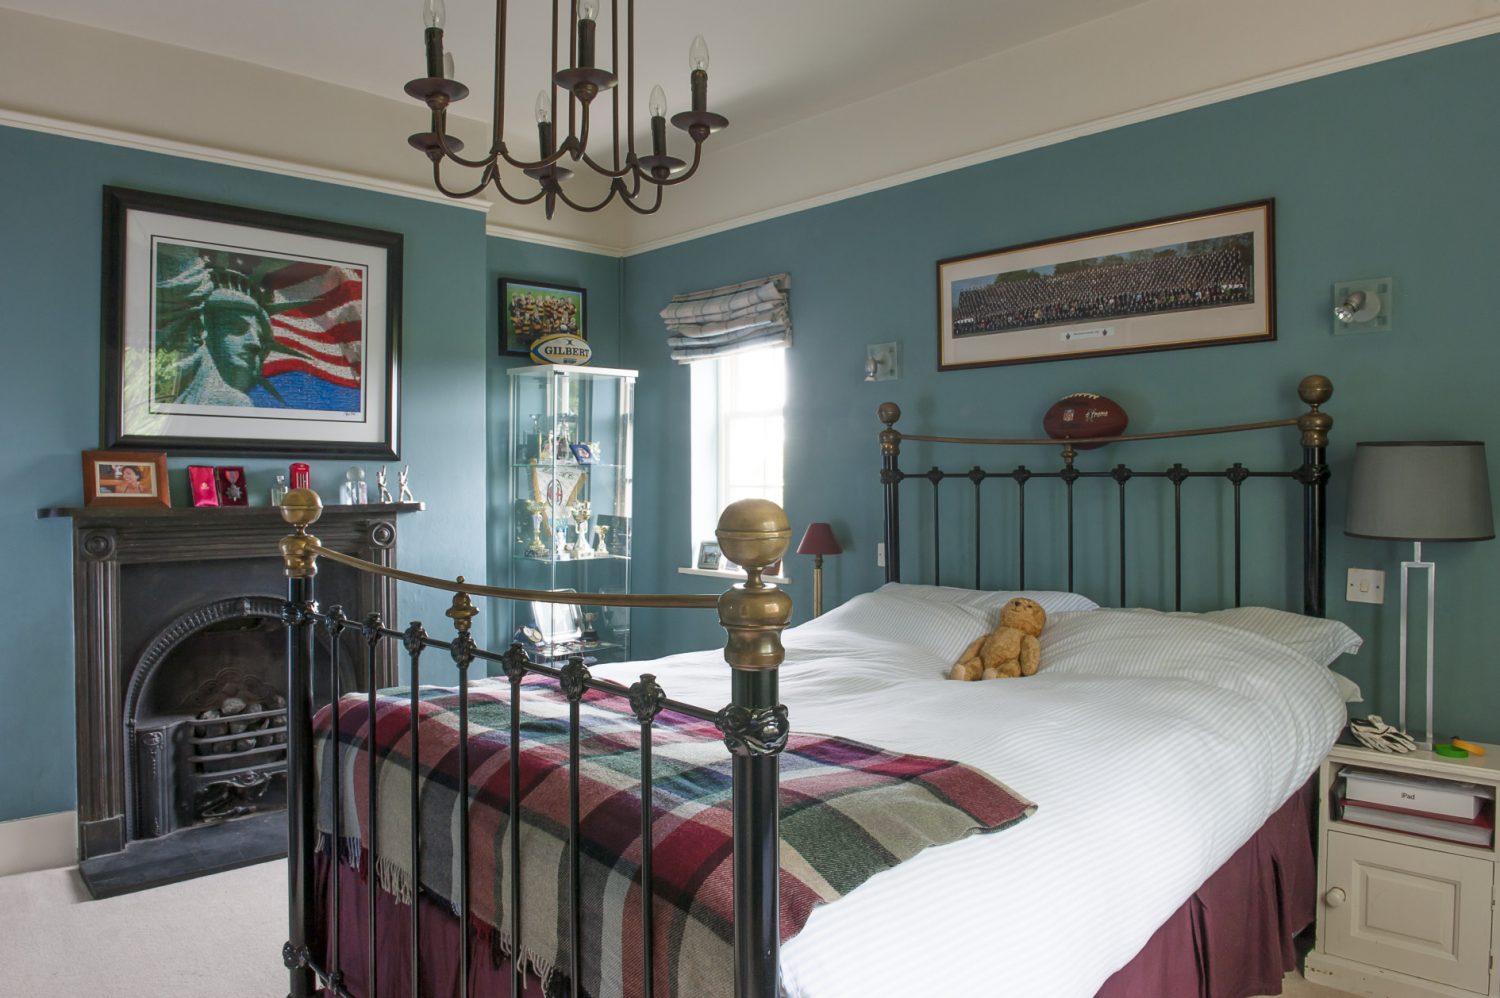 Son Charlie’s room features a brass and iron bed dressed with piqué white cotton and a plaid woollen throw